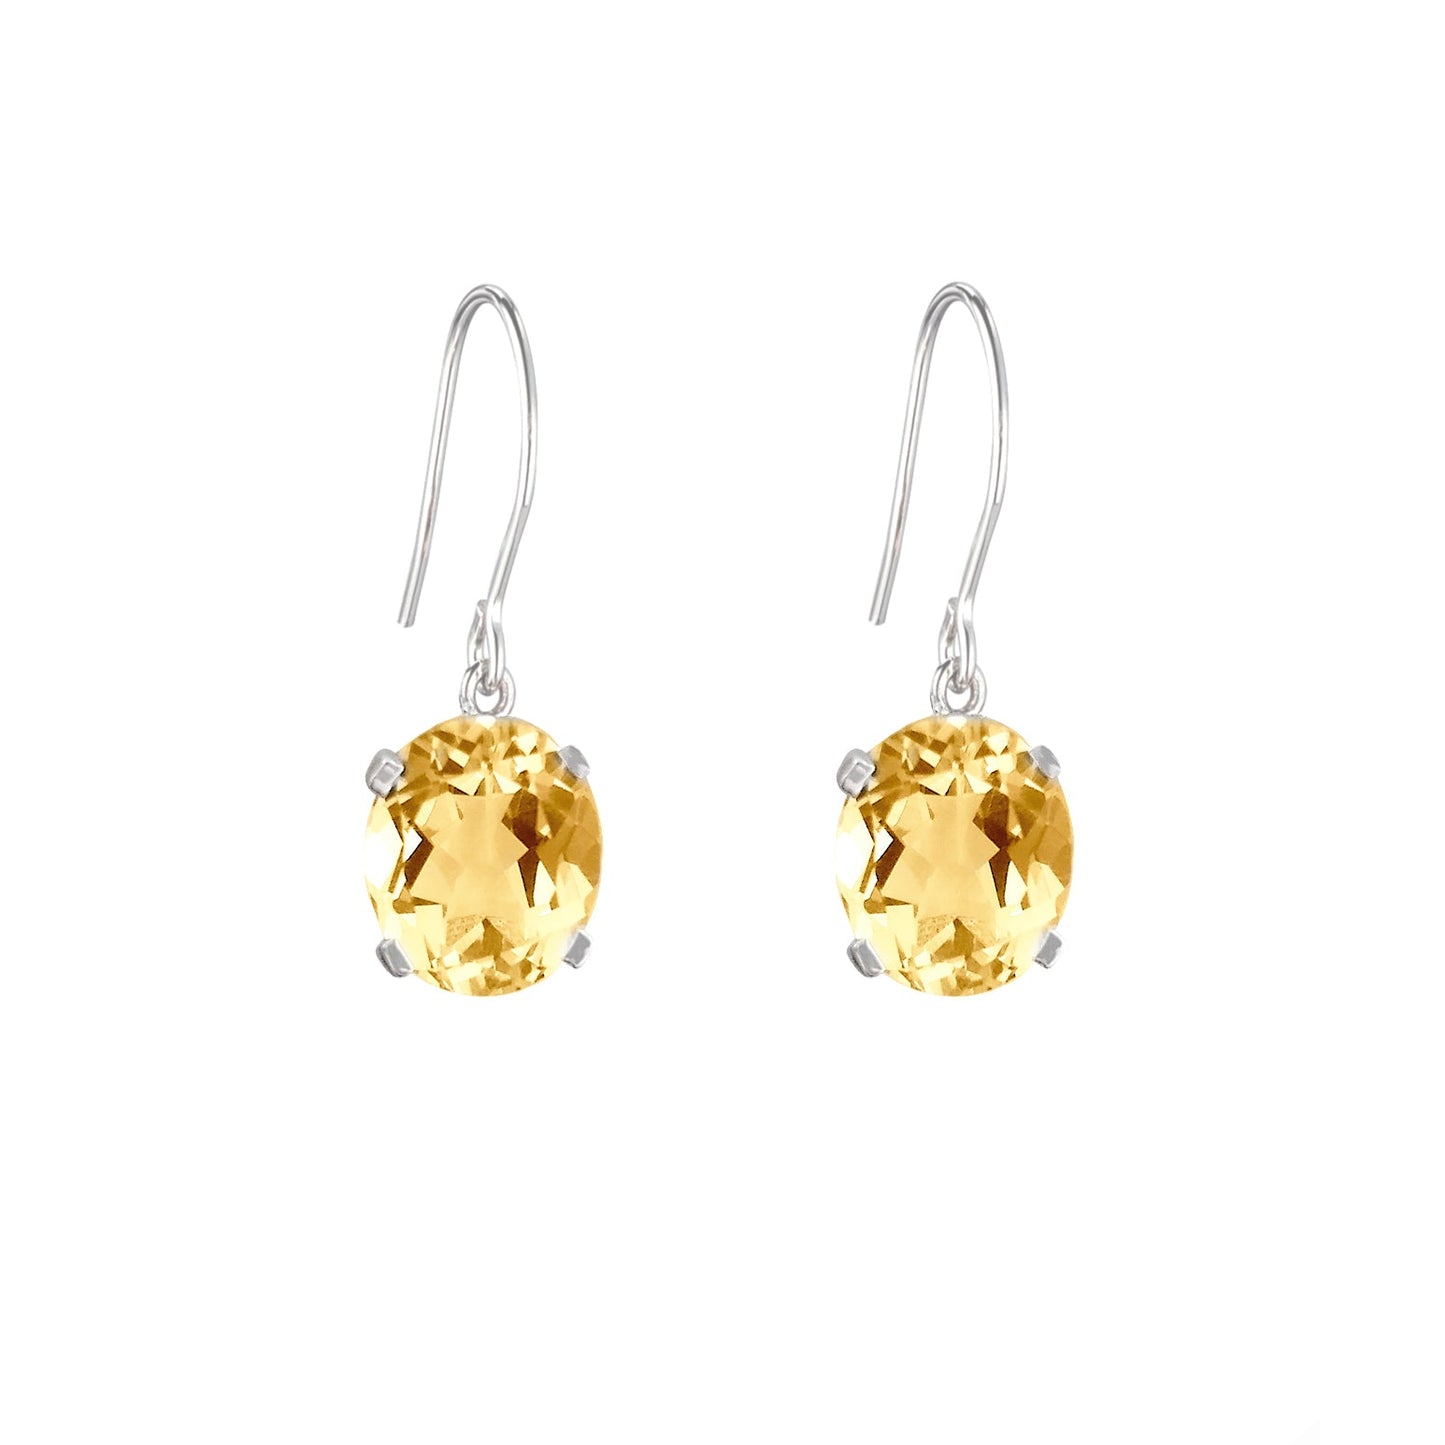 Citrine Hook Earrings | The South of France Collection | Augustine Jewels | Gemstone Earrings